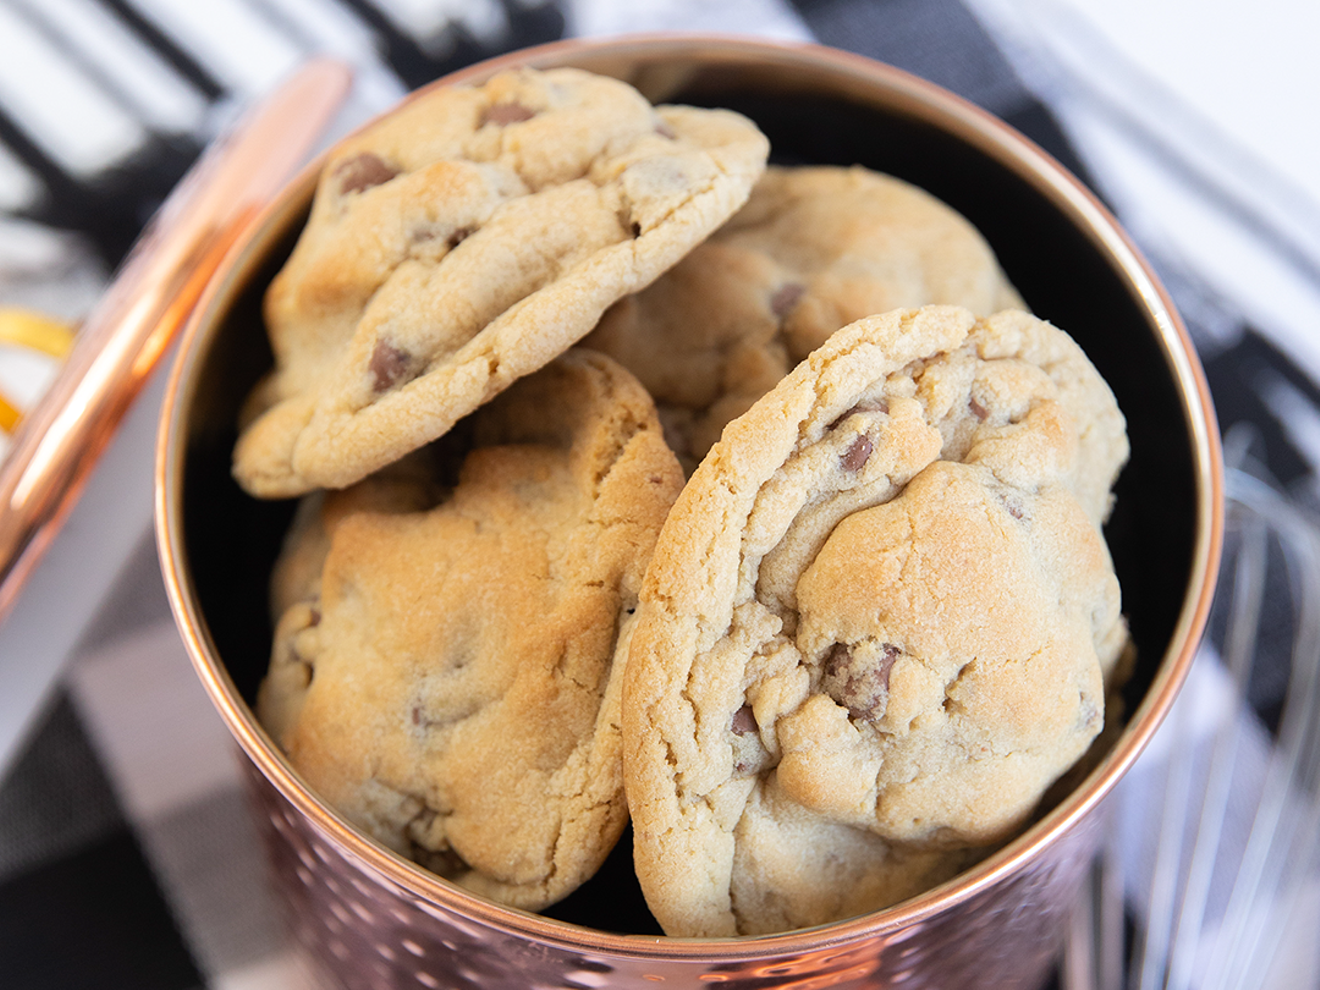 Batch Cookie Shop is expanding from one Valley store to five.